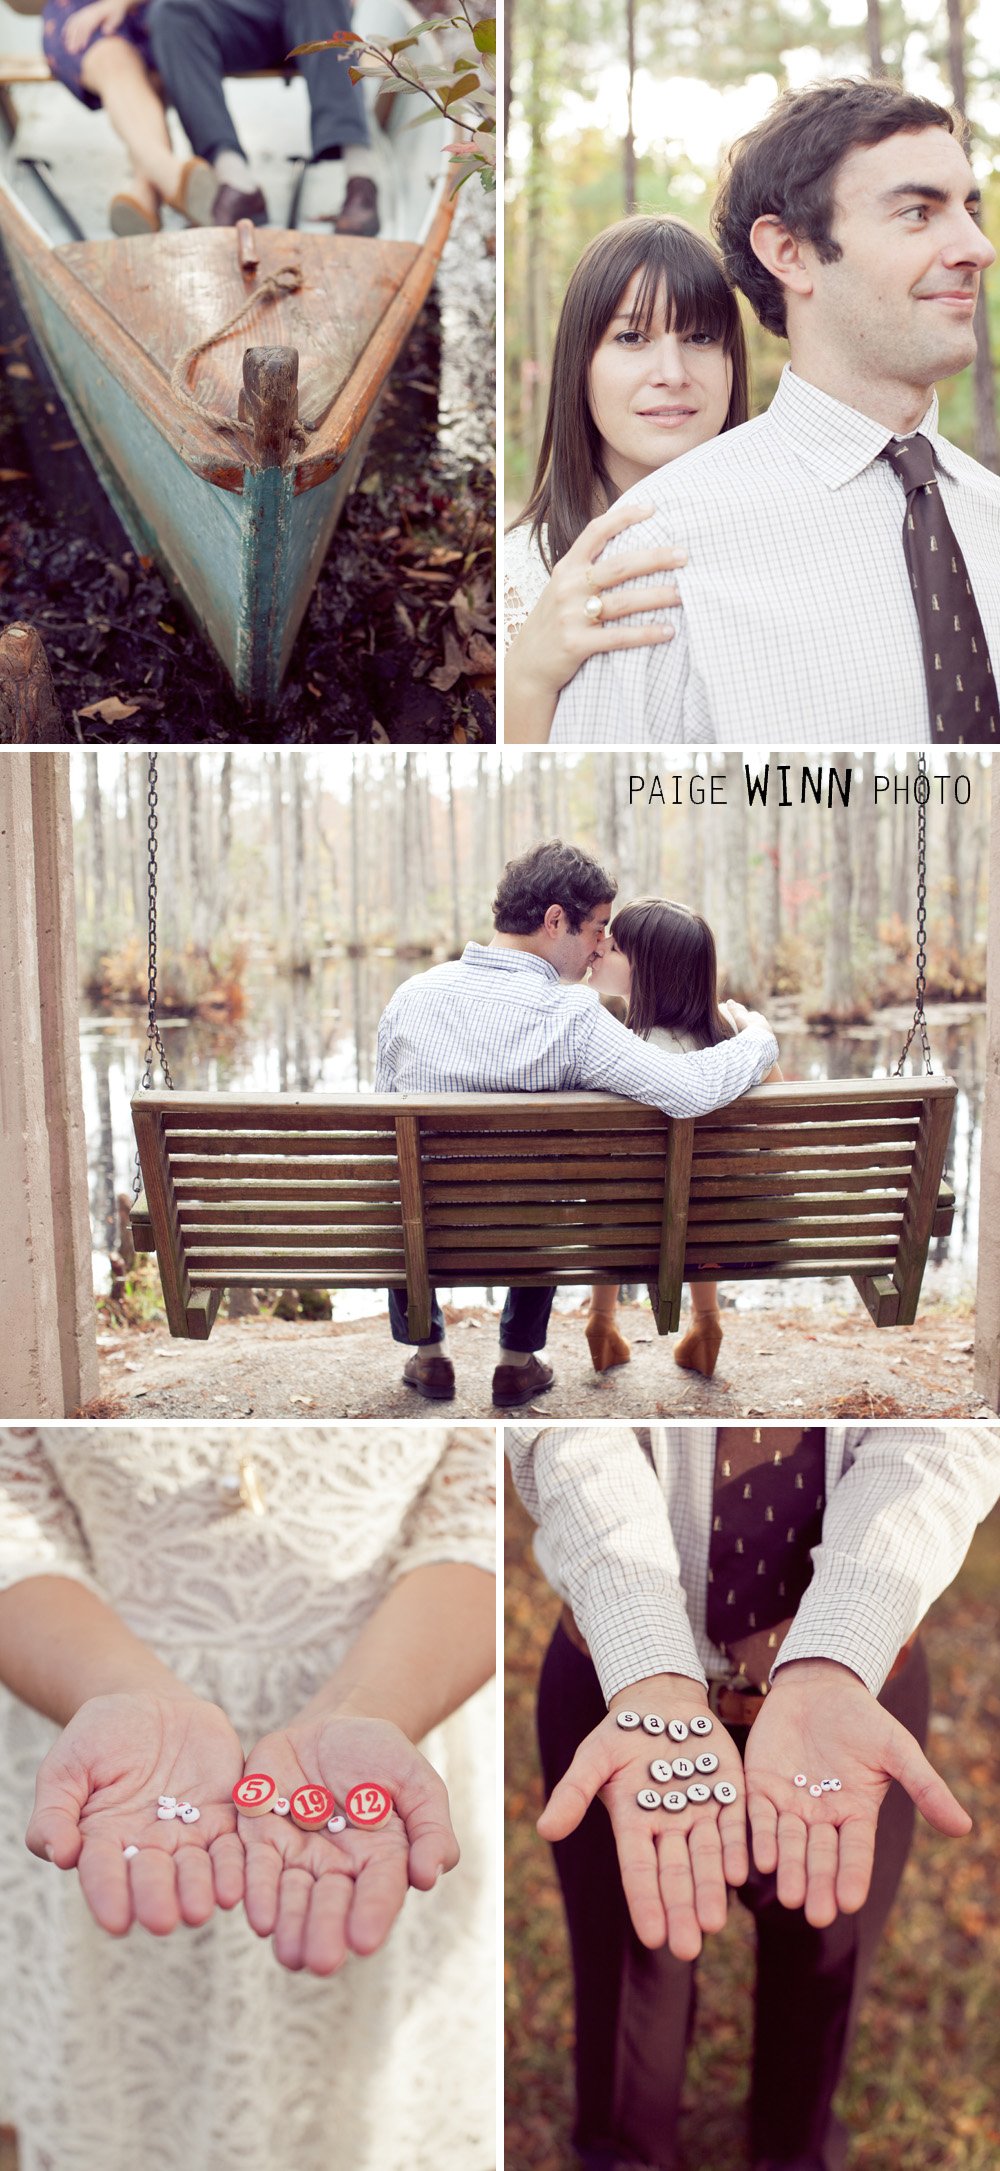 7 Save The Date Designs You Must See | Wedding Planning | Wedding Blog